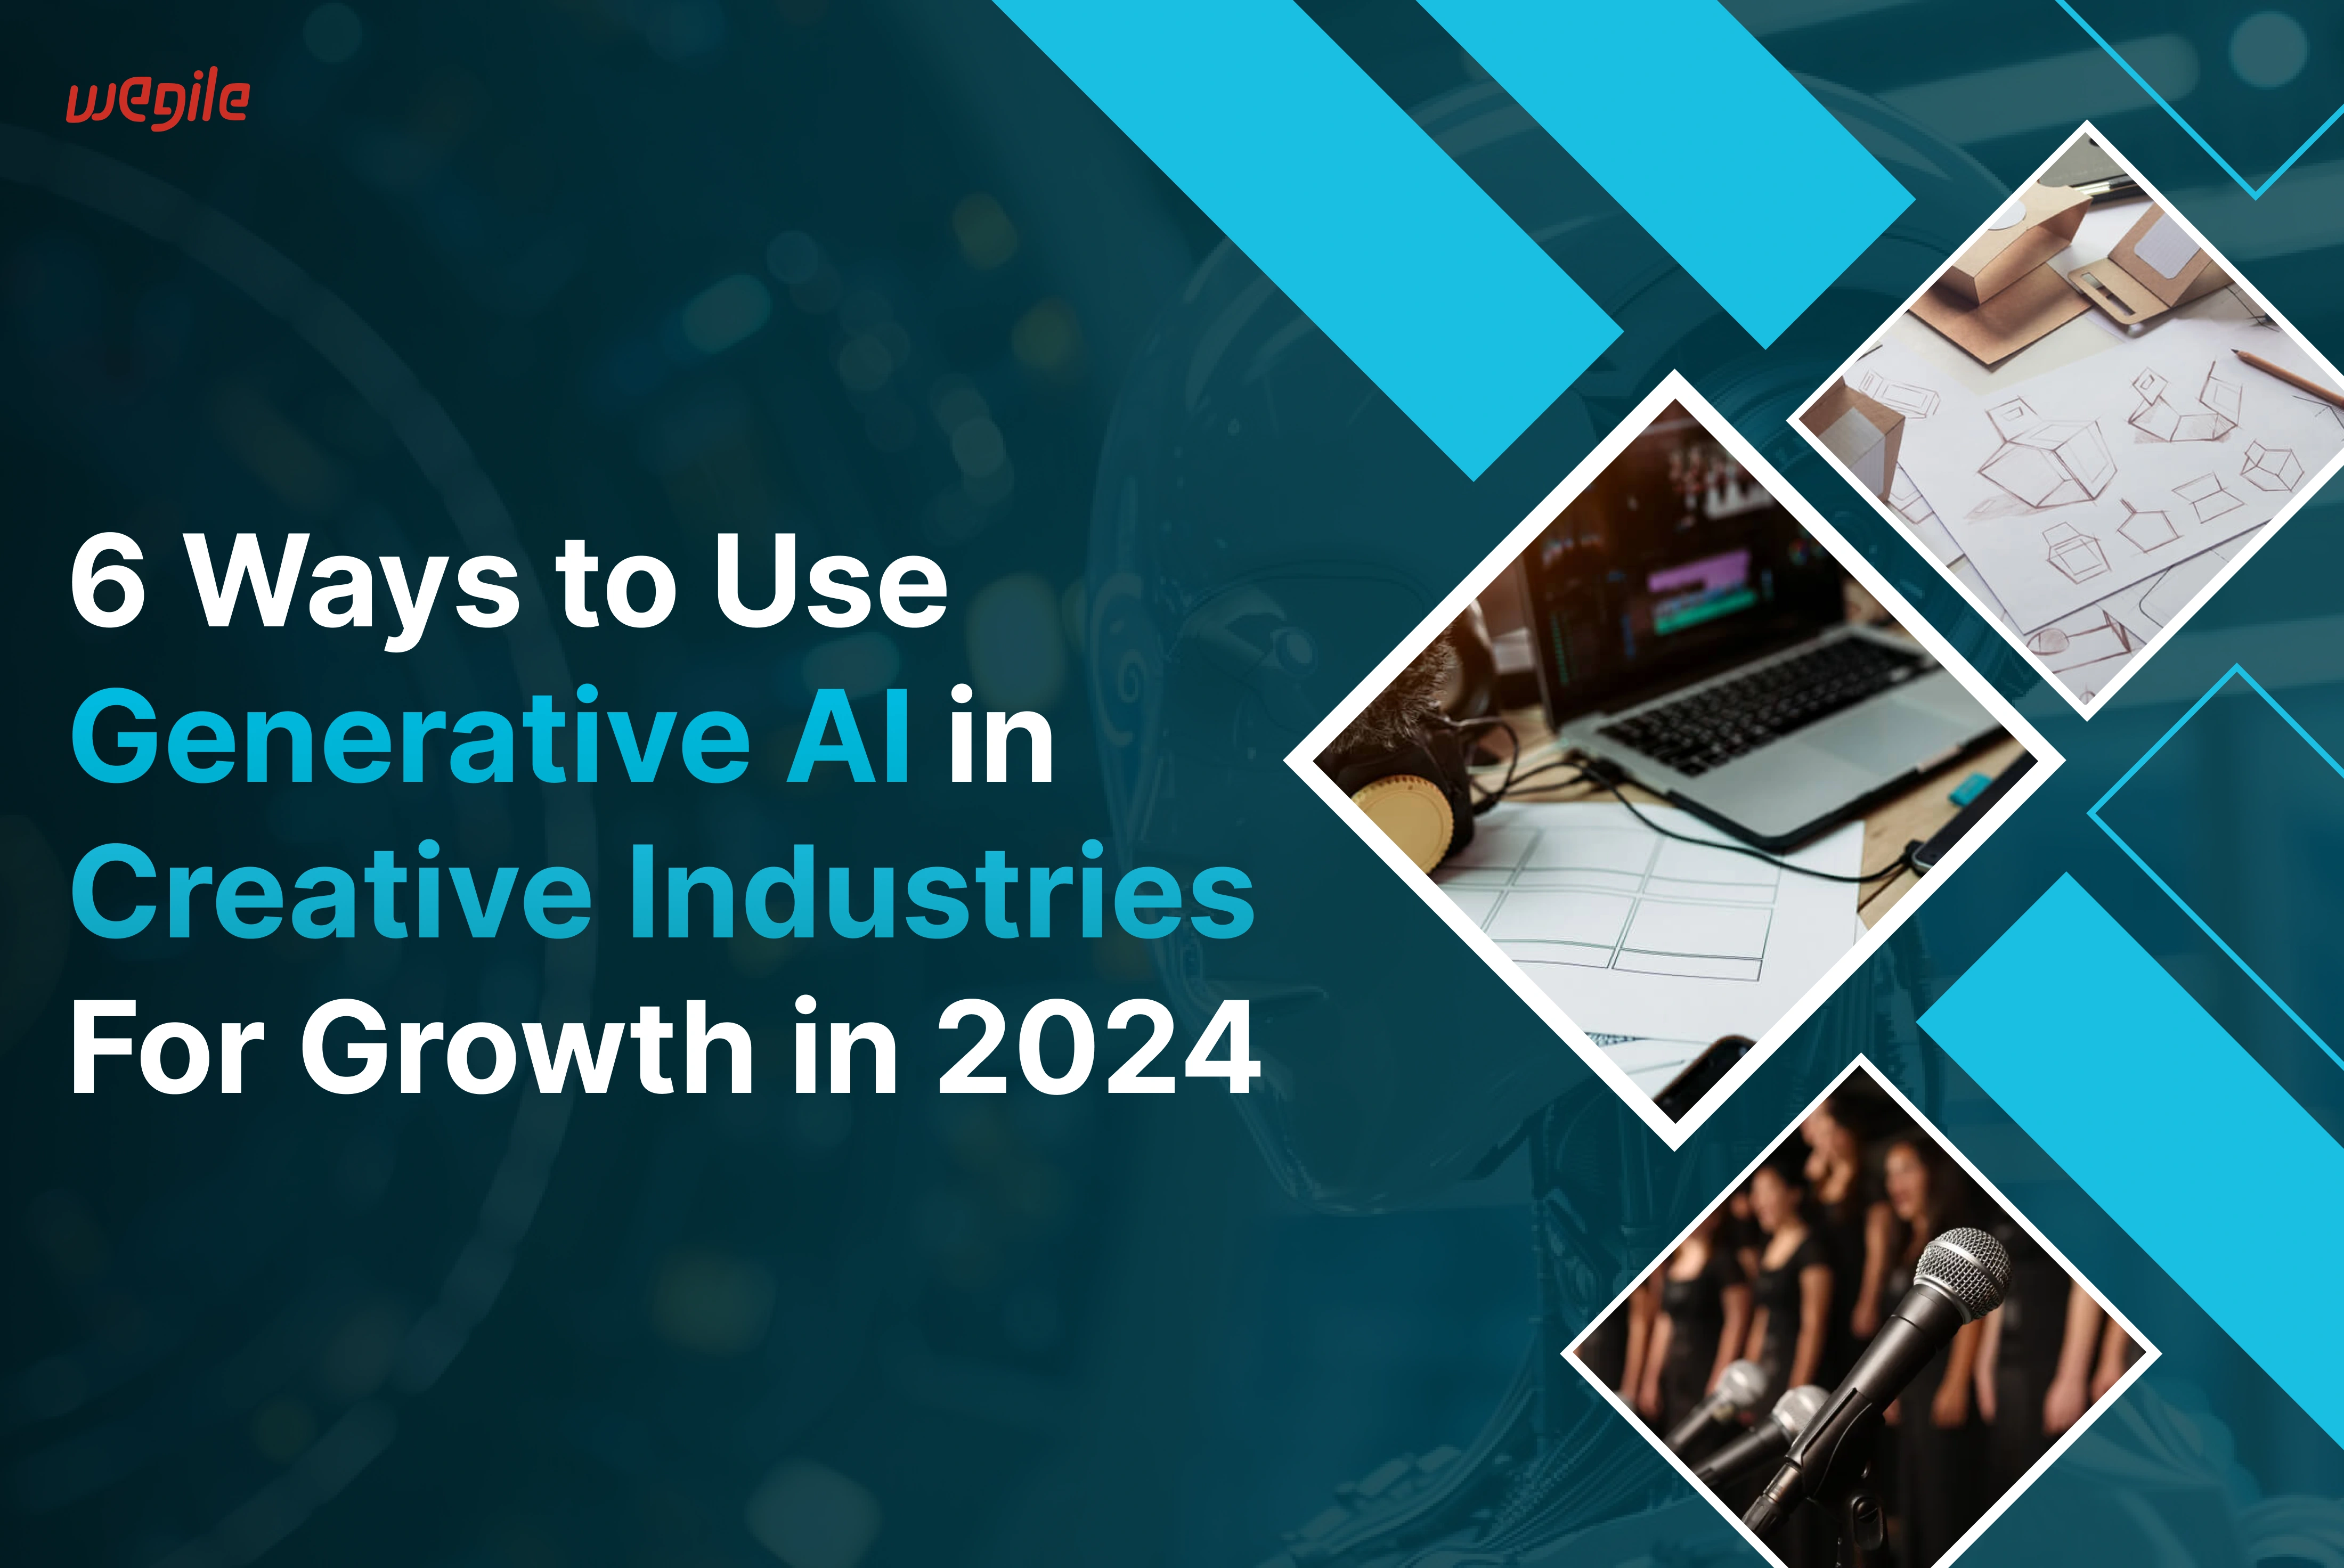 6-ways-to-use-generative-ai-in-creative-industries-for-growth-in-2024